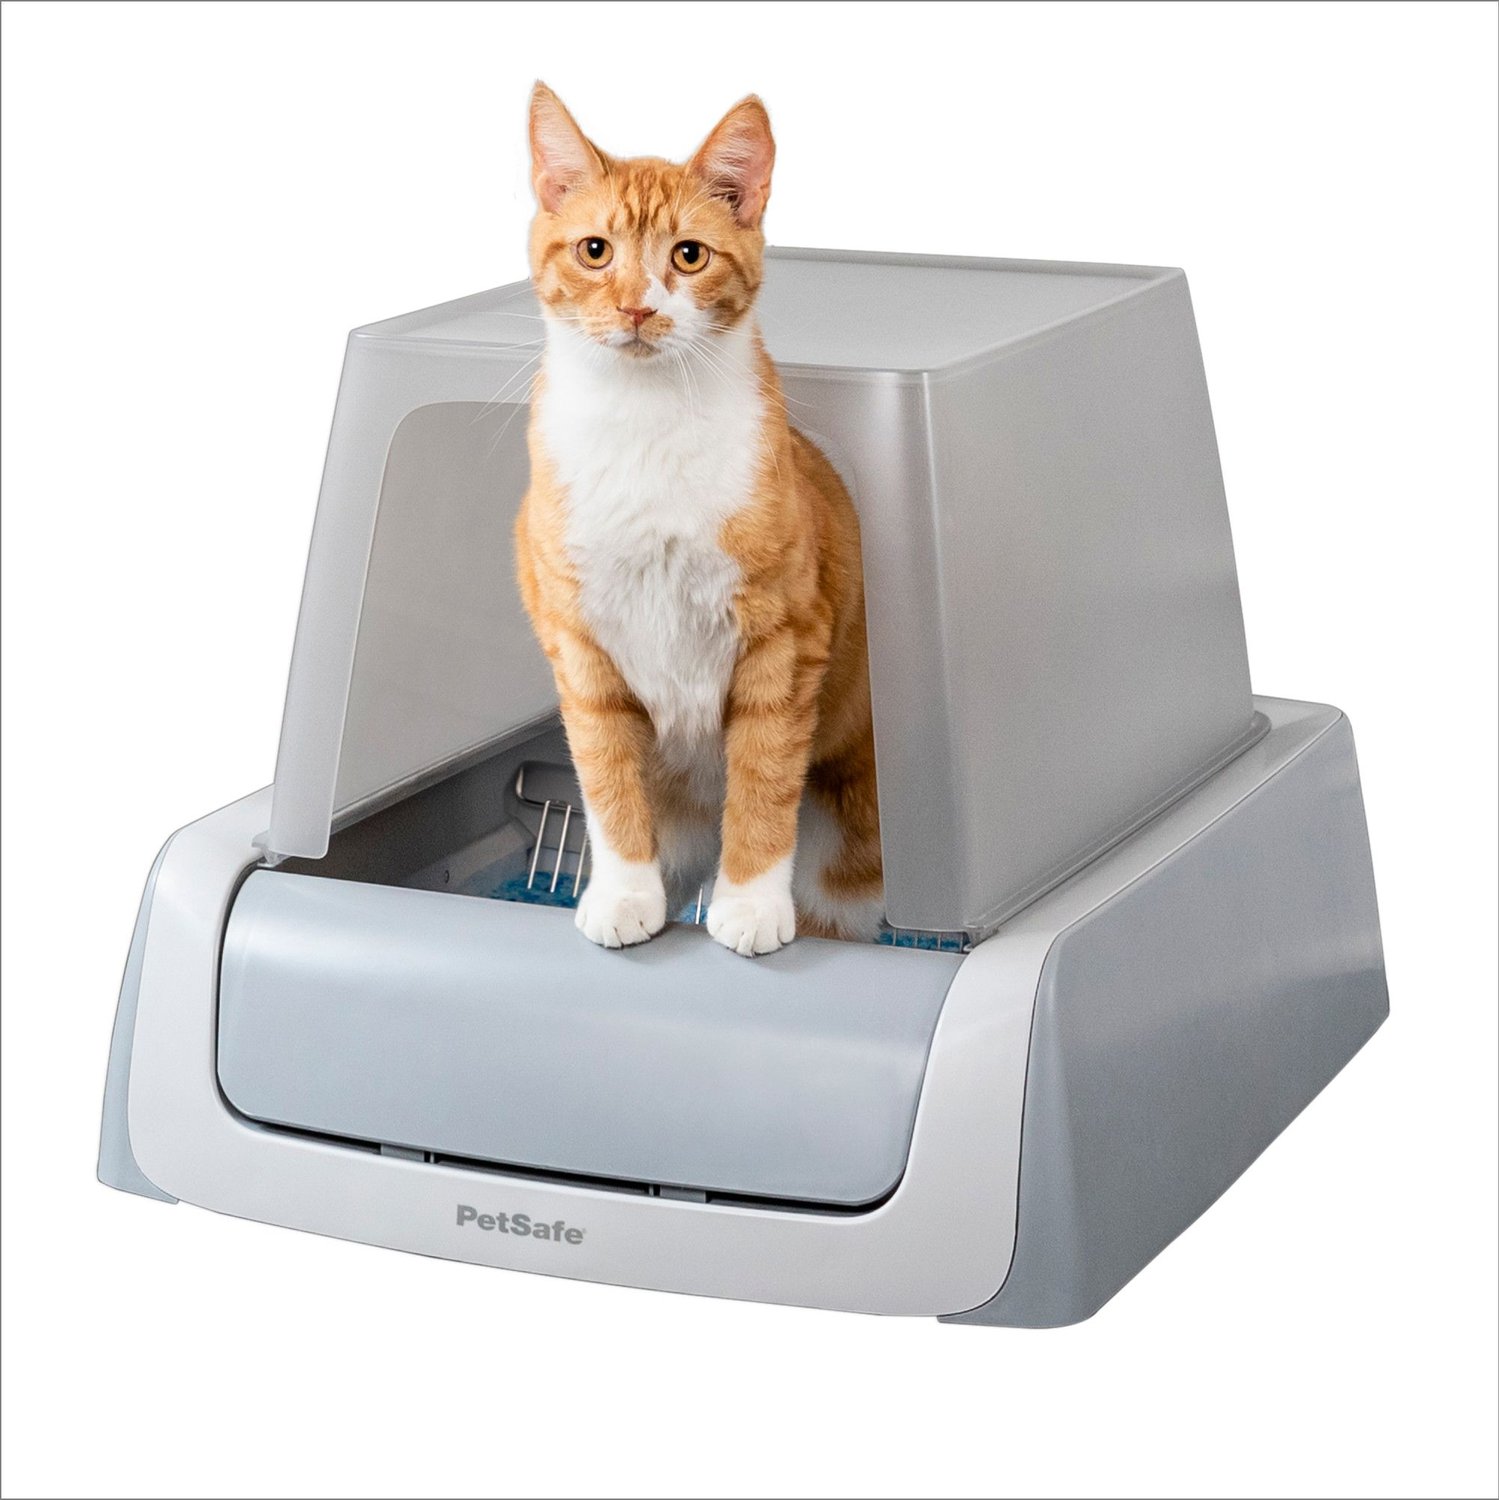 ScoopFree Covered Automatic Self-Cleaning Cat Litter Box